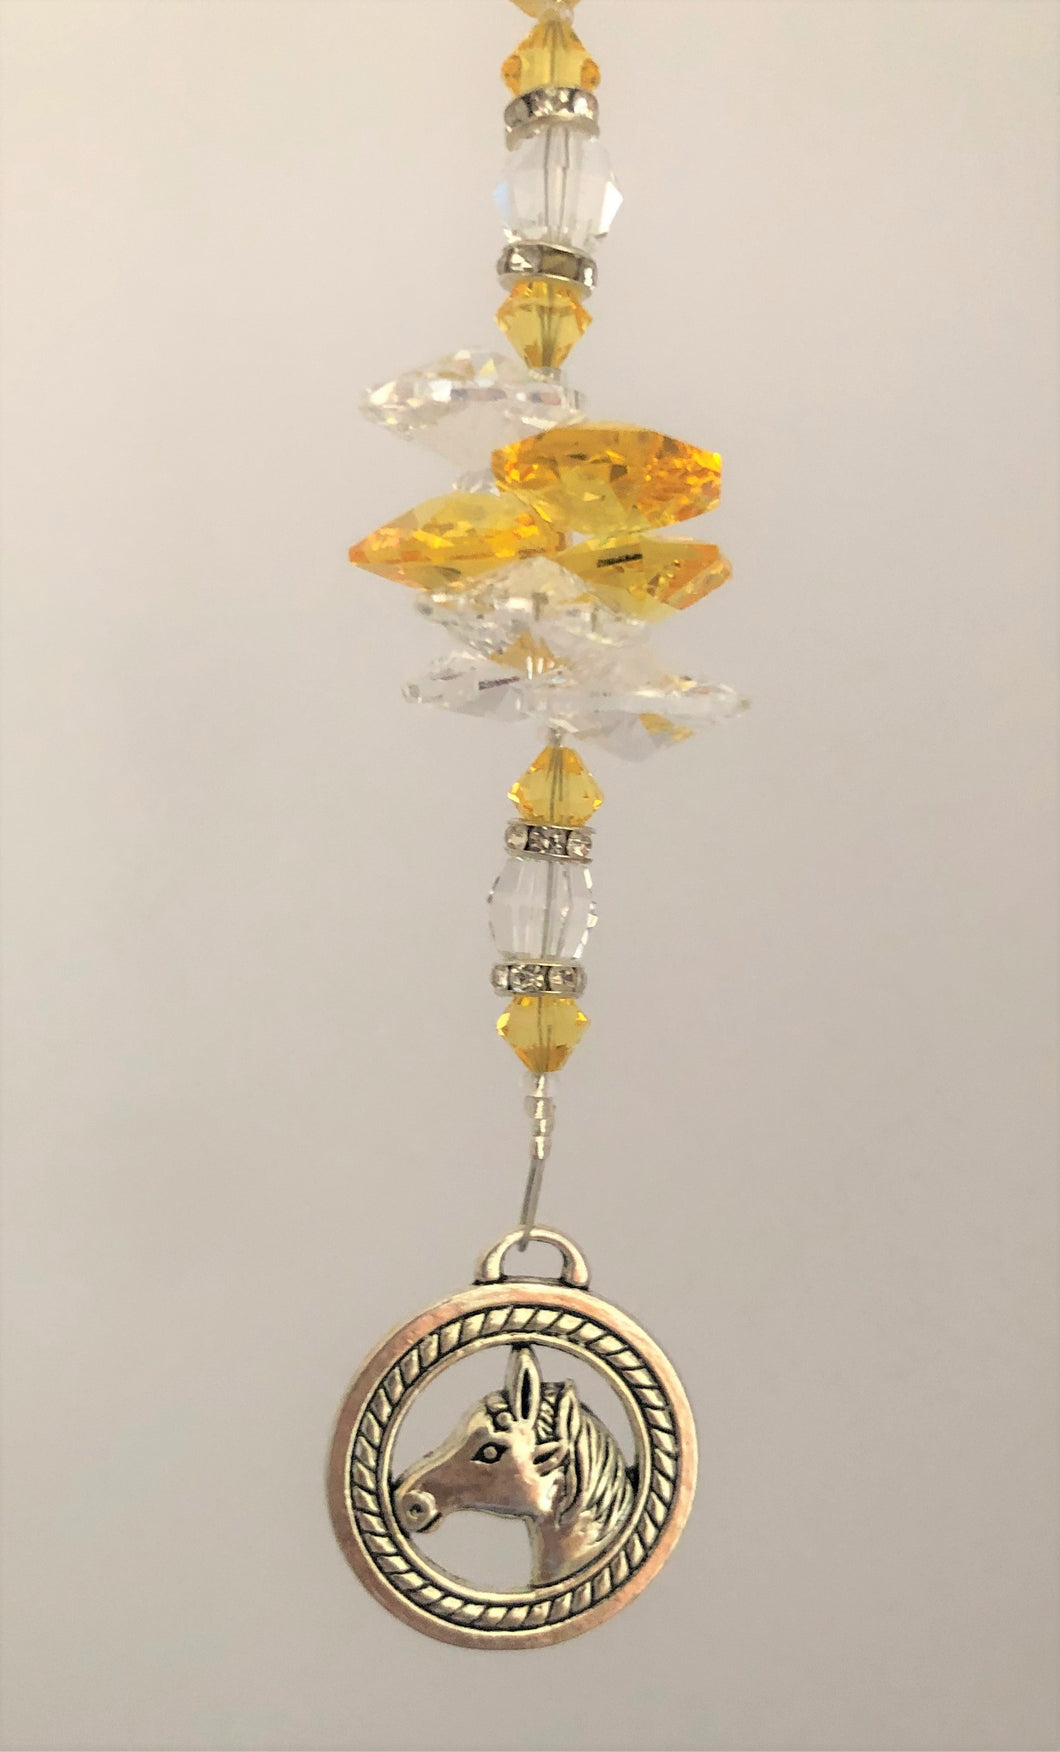 This beautiful Horse suncatcher which is decorated with crystals and Citrine